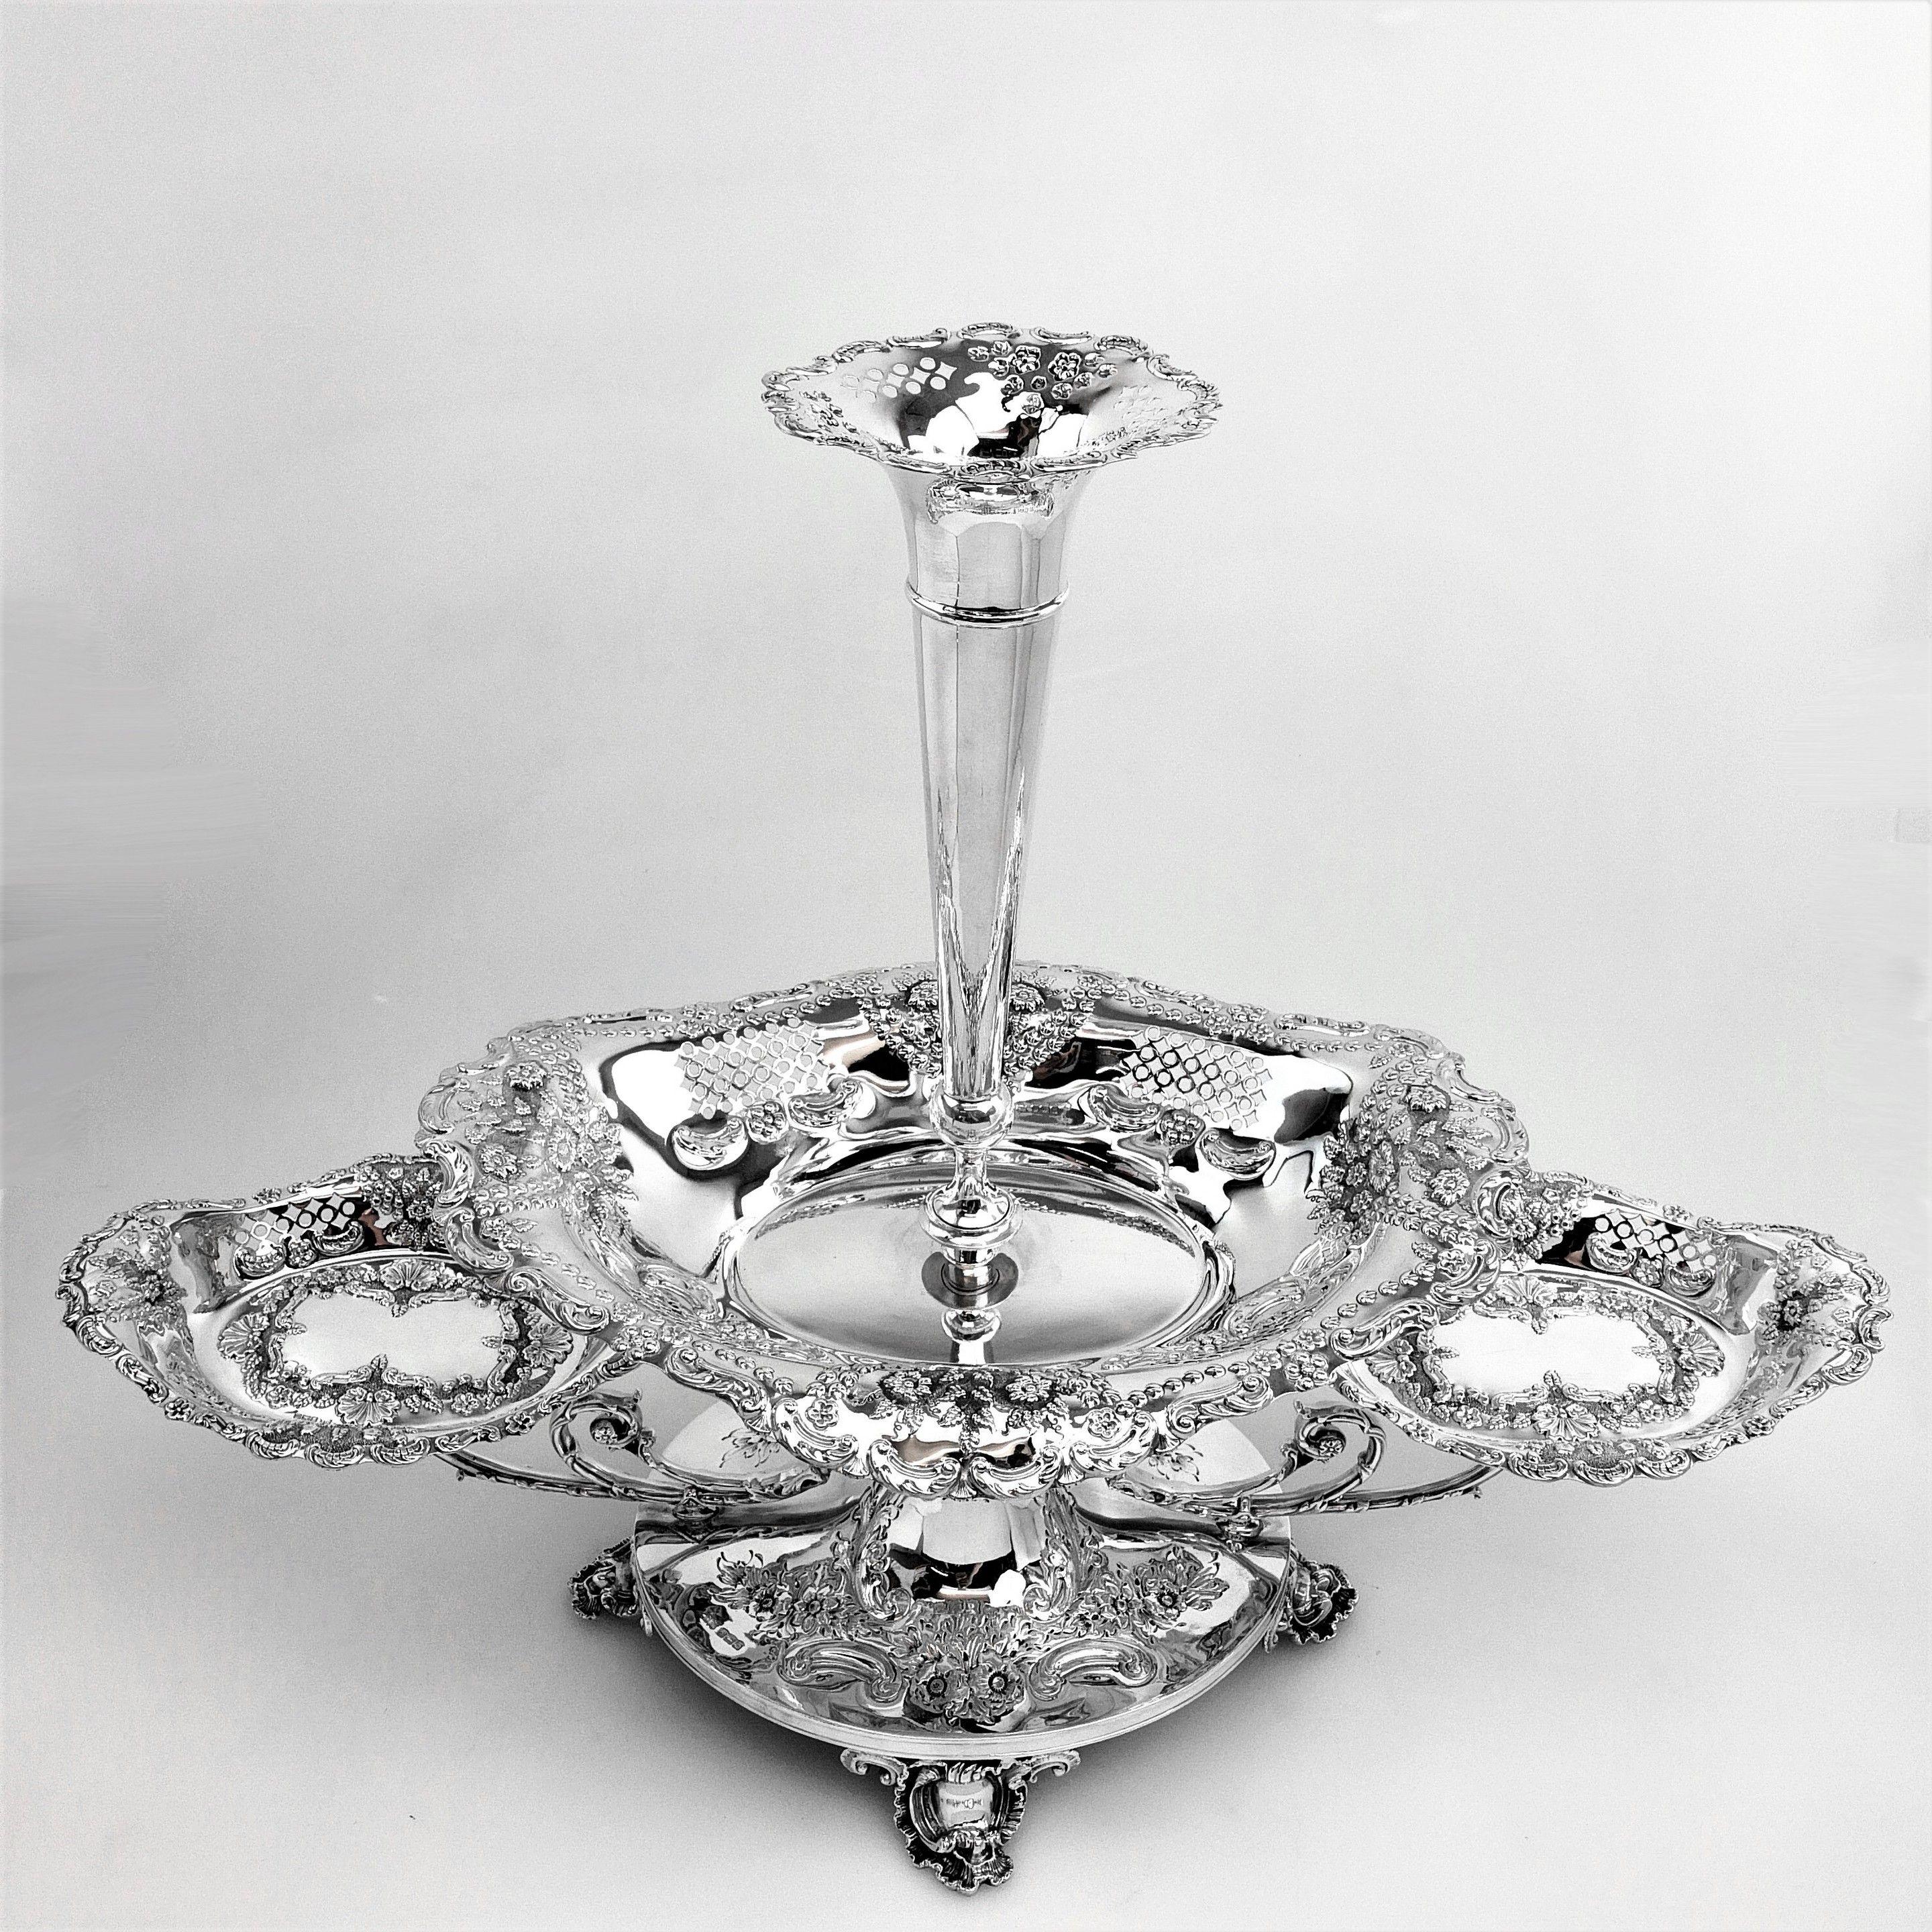 A magnificent antique solid silver epergne centre piece to ornament any table. Standing on an impressive oval pedestal base supported by four ornate feet, the epergne has a large oval central basket and two smaller oval baskets extending out on